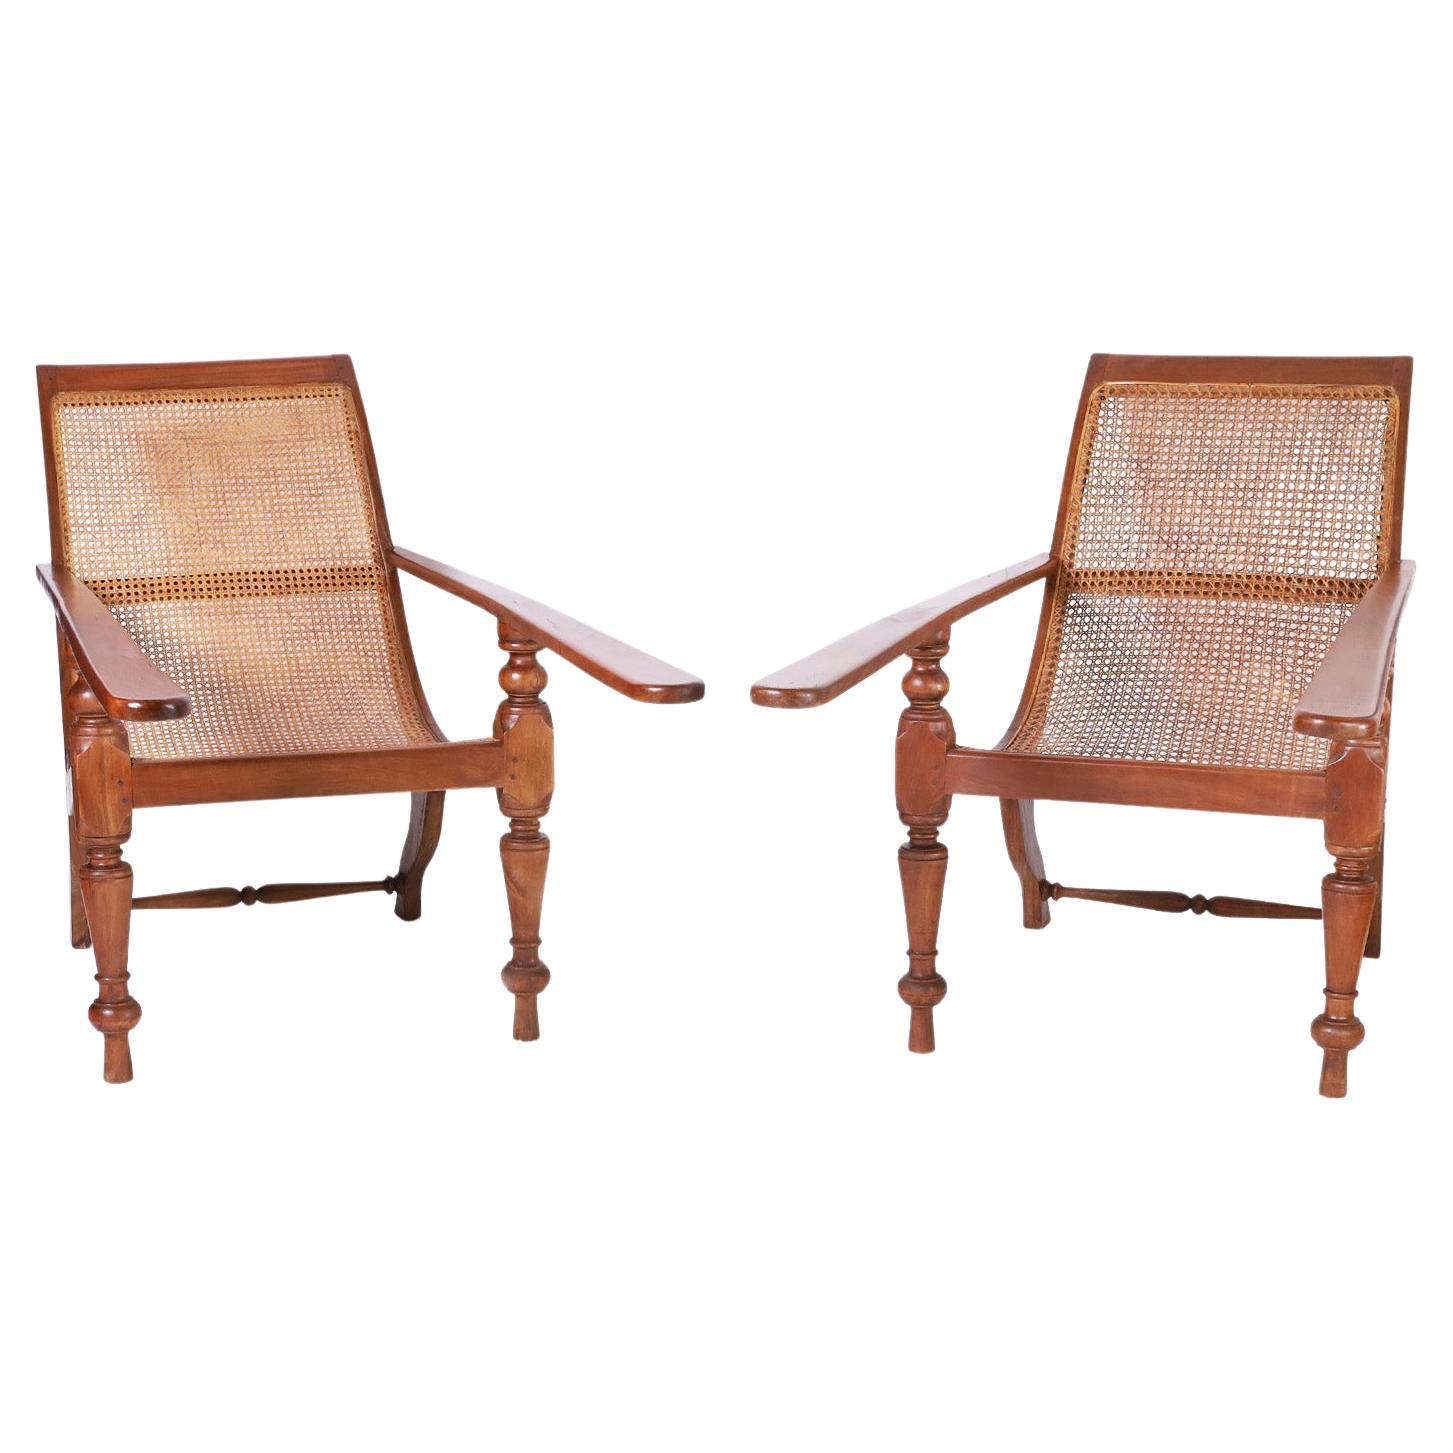 Pair of Antique Caned British Colonial Planters Chairs